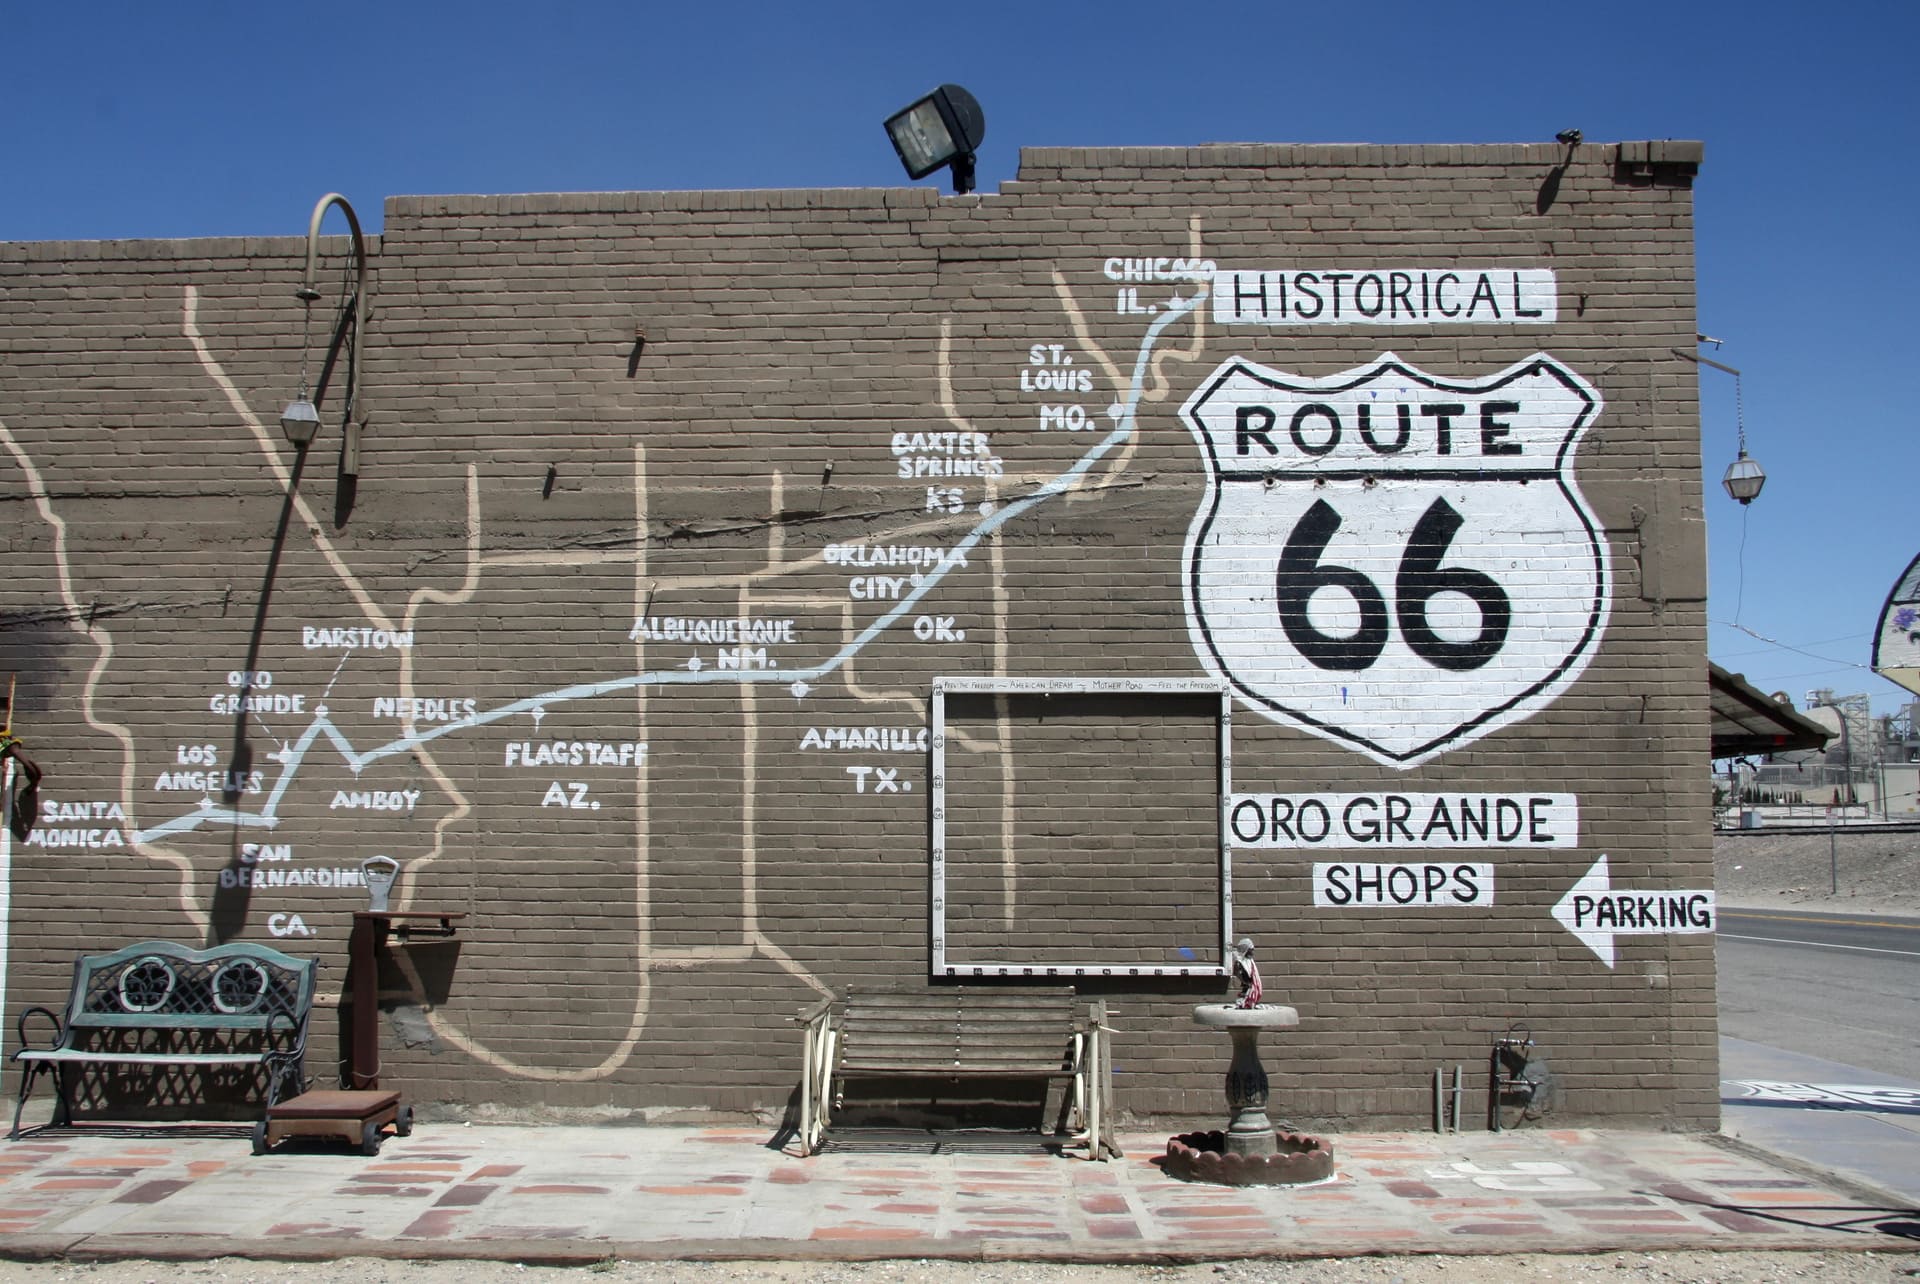 The ultimate route 66 road trip